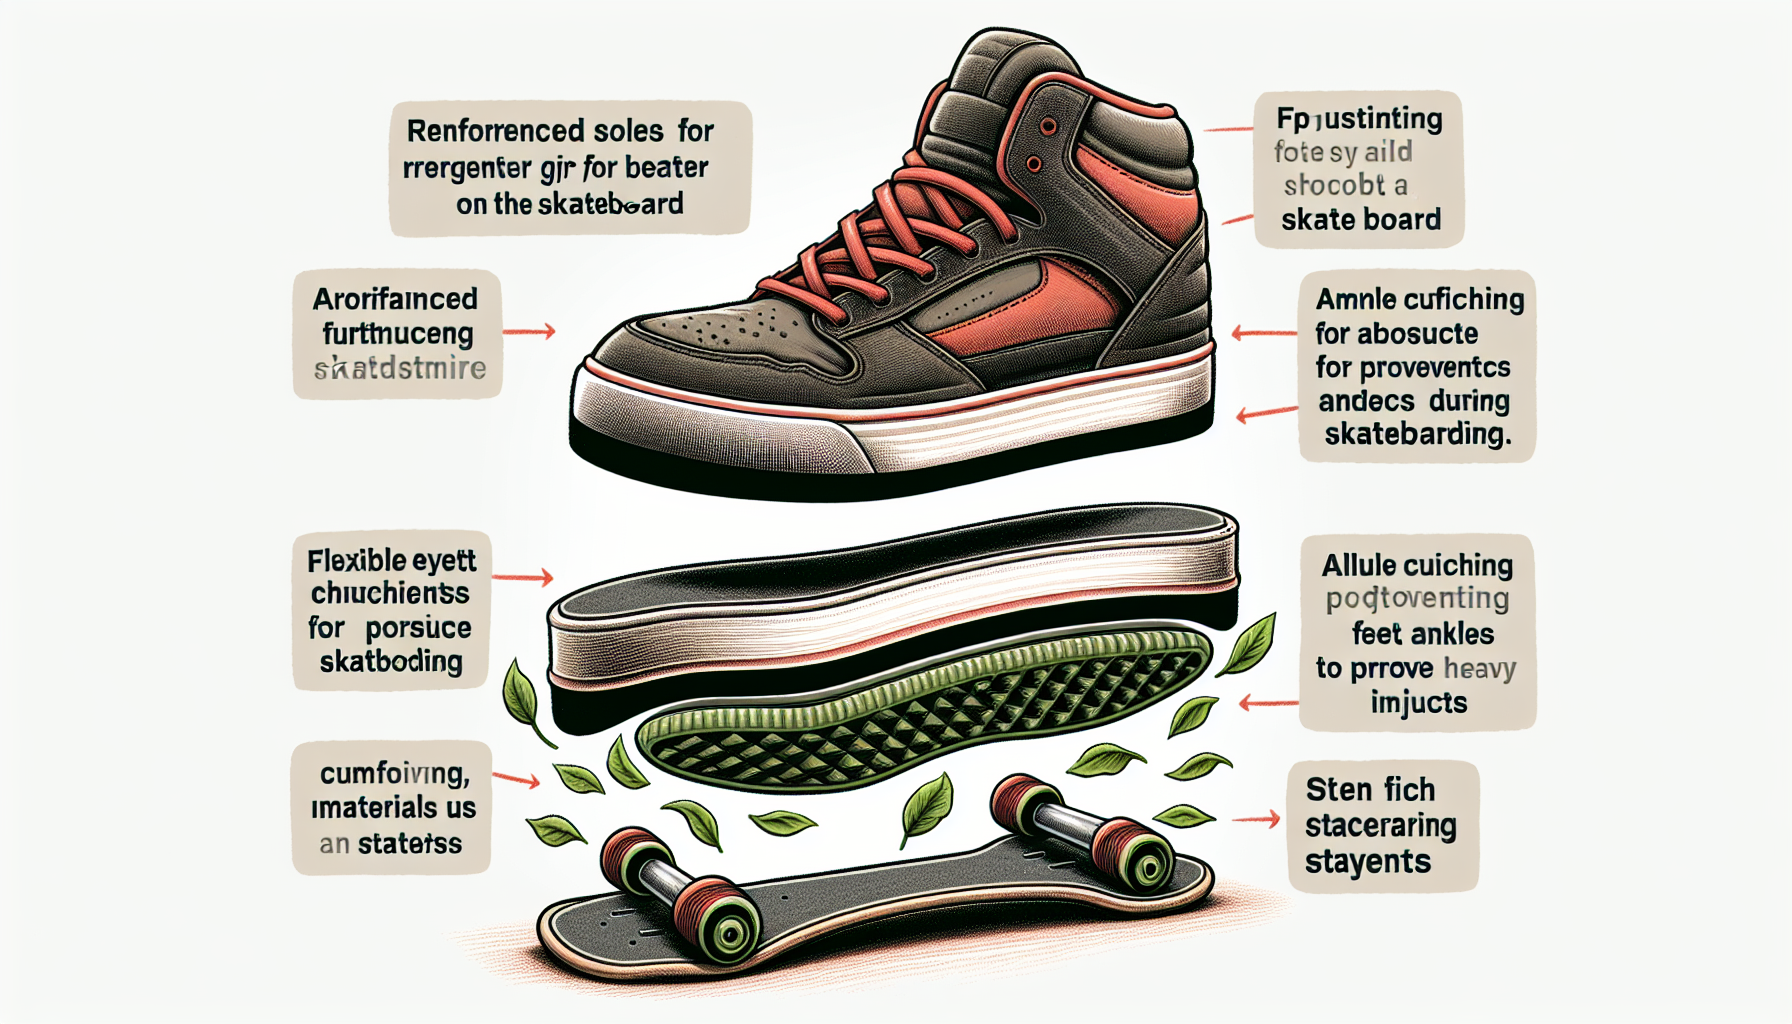 Can You Discuss The Role Of Skate Shoes In Preventing Injuries And Discomfort?